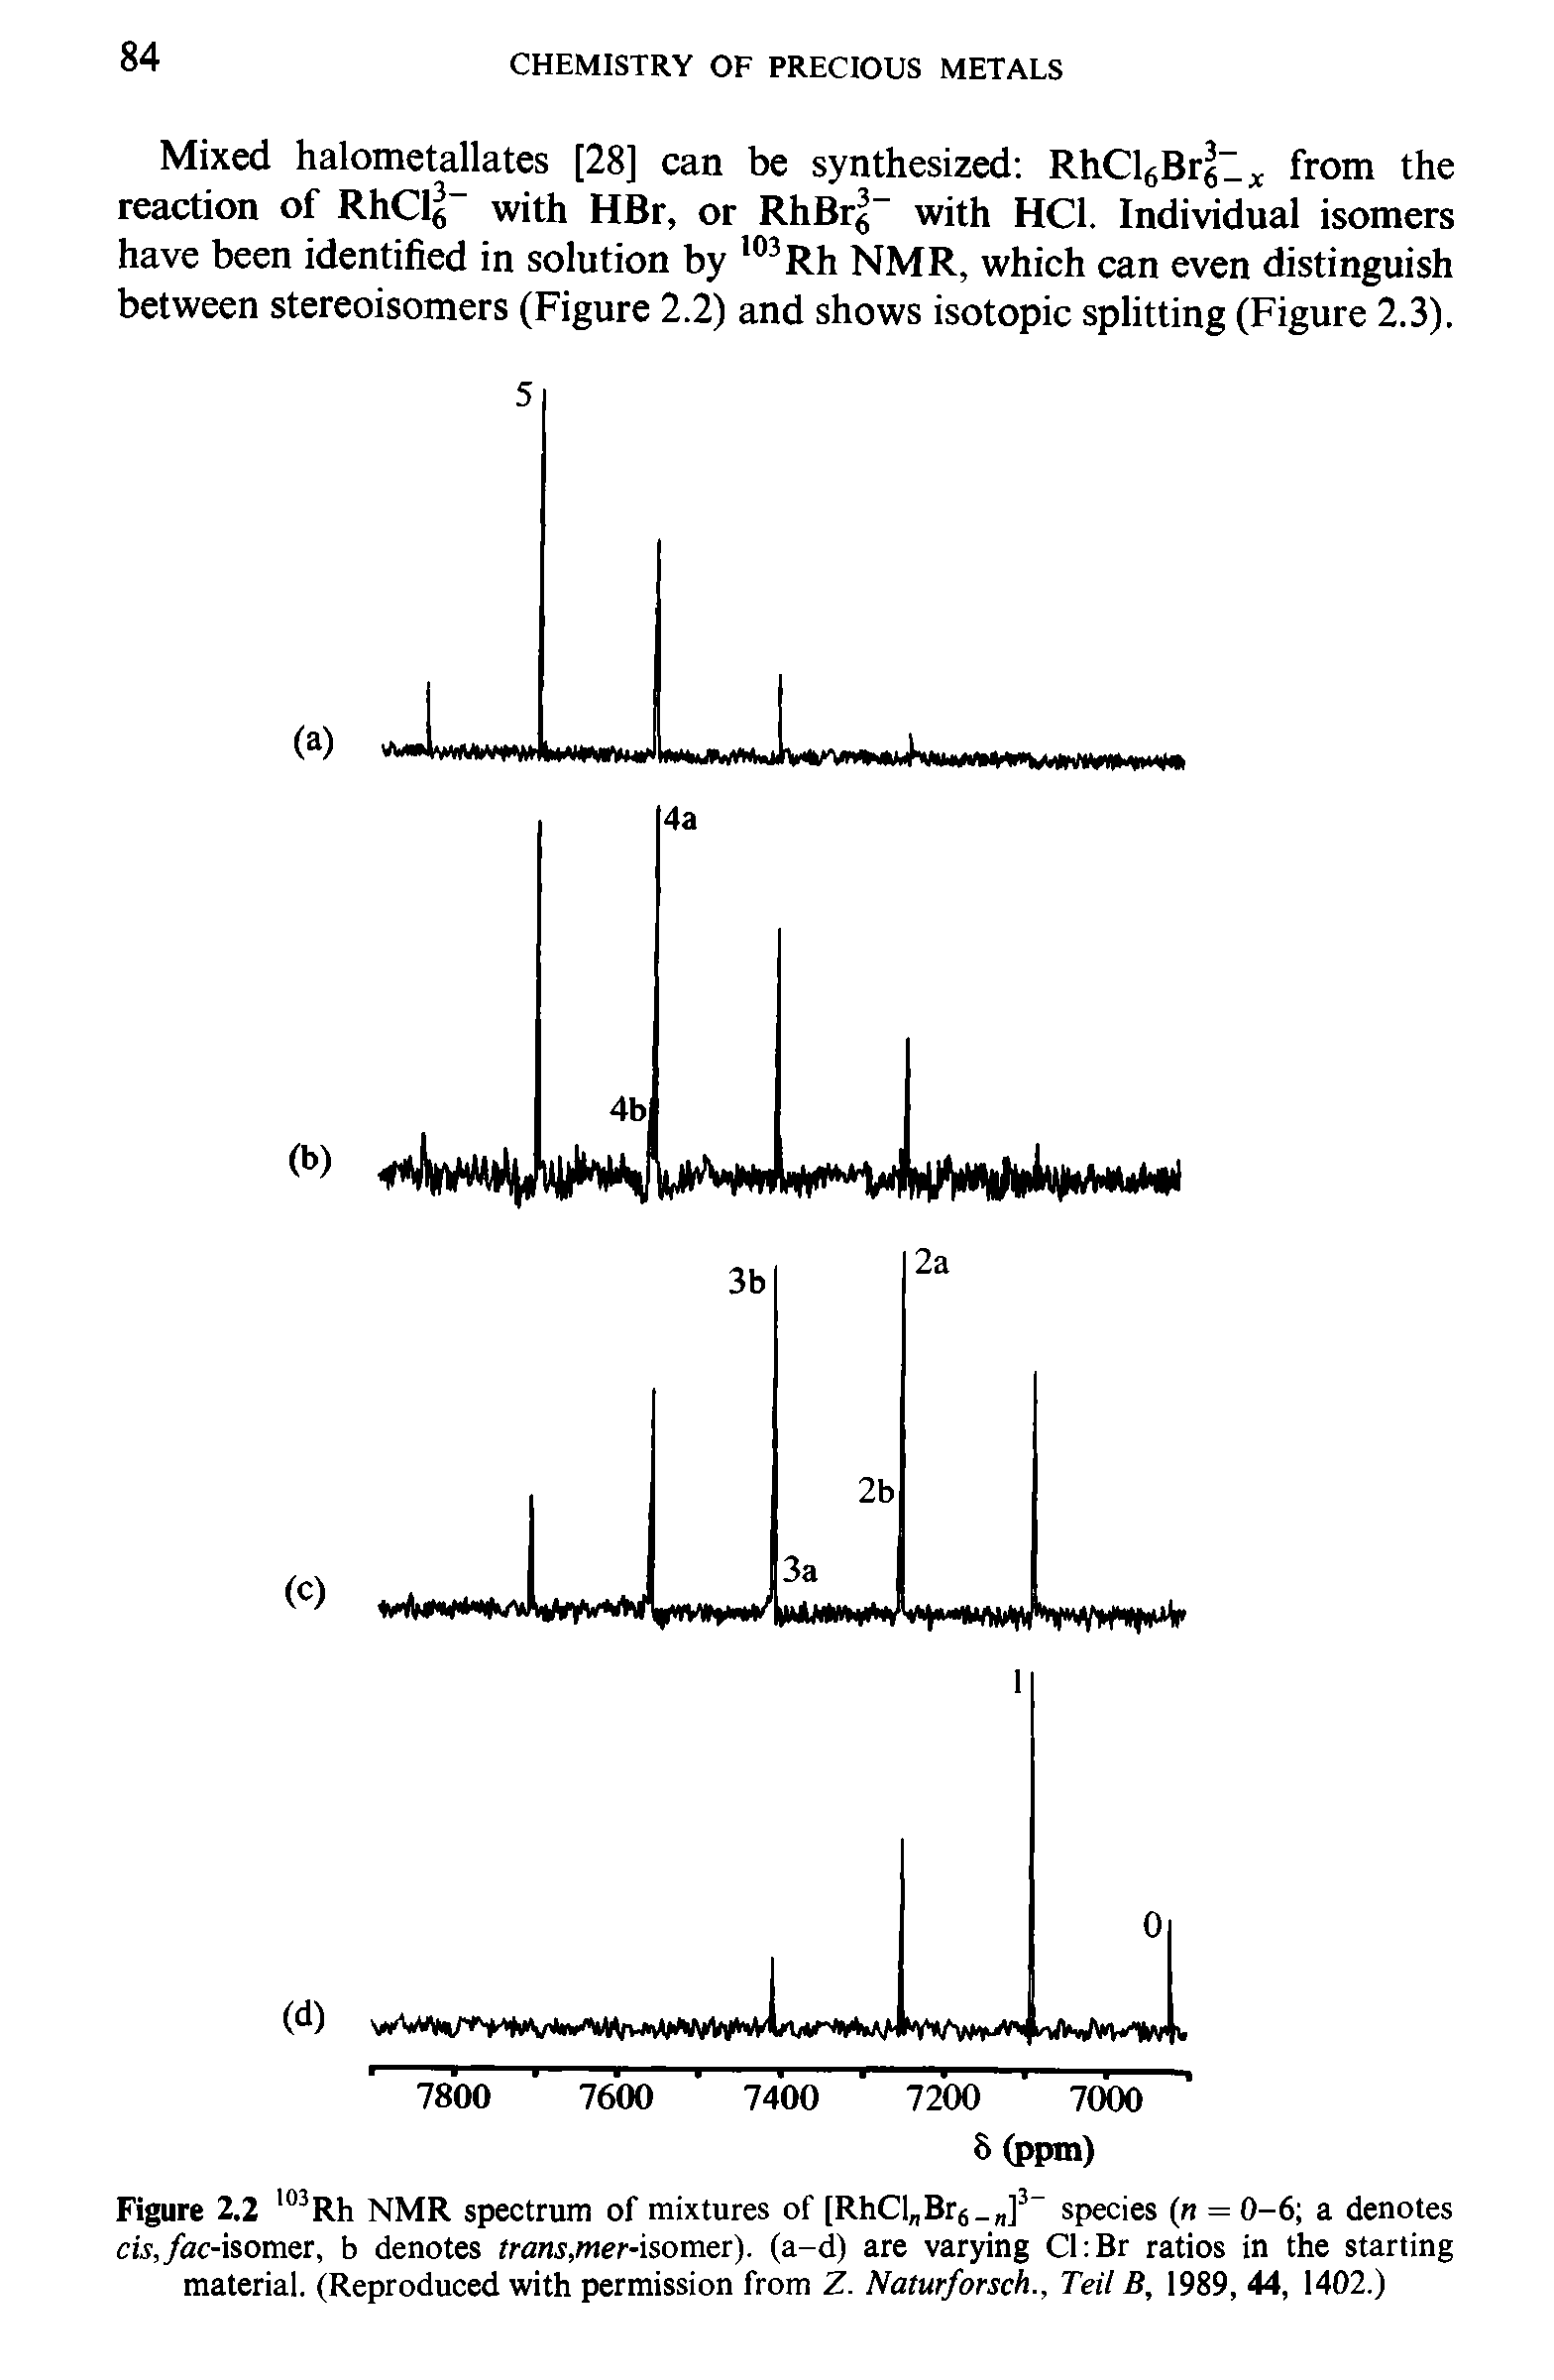 Figure 2.2 103Rh NMR spectrum of mixtures of [RhCl Br6 ]3 species (n = 0-6 a denotes cis,/ac-isomer, b denotes trans,mer-isomer), (a-d) are varying Cl Br ratios in the starting material. (Reproduced with permission from Z. Naturforsch., Teil B, 1989, 44, 1402.)...